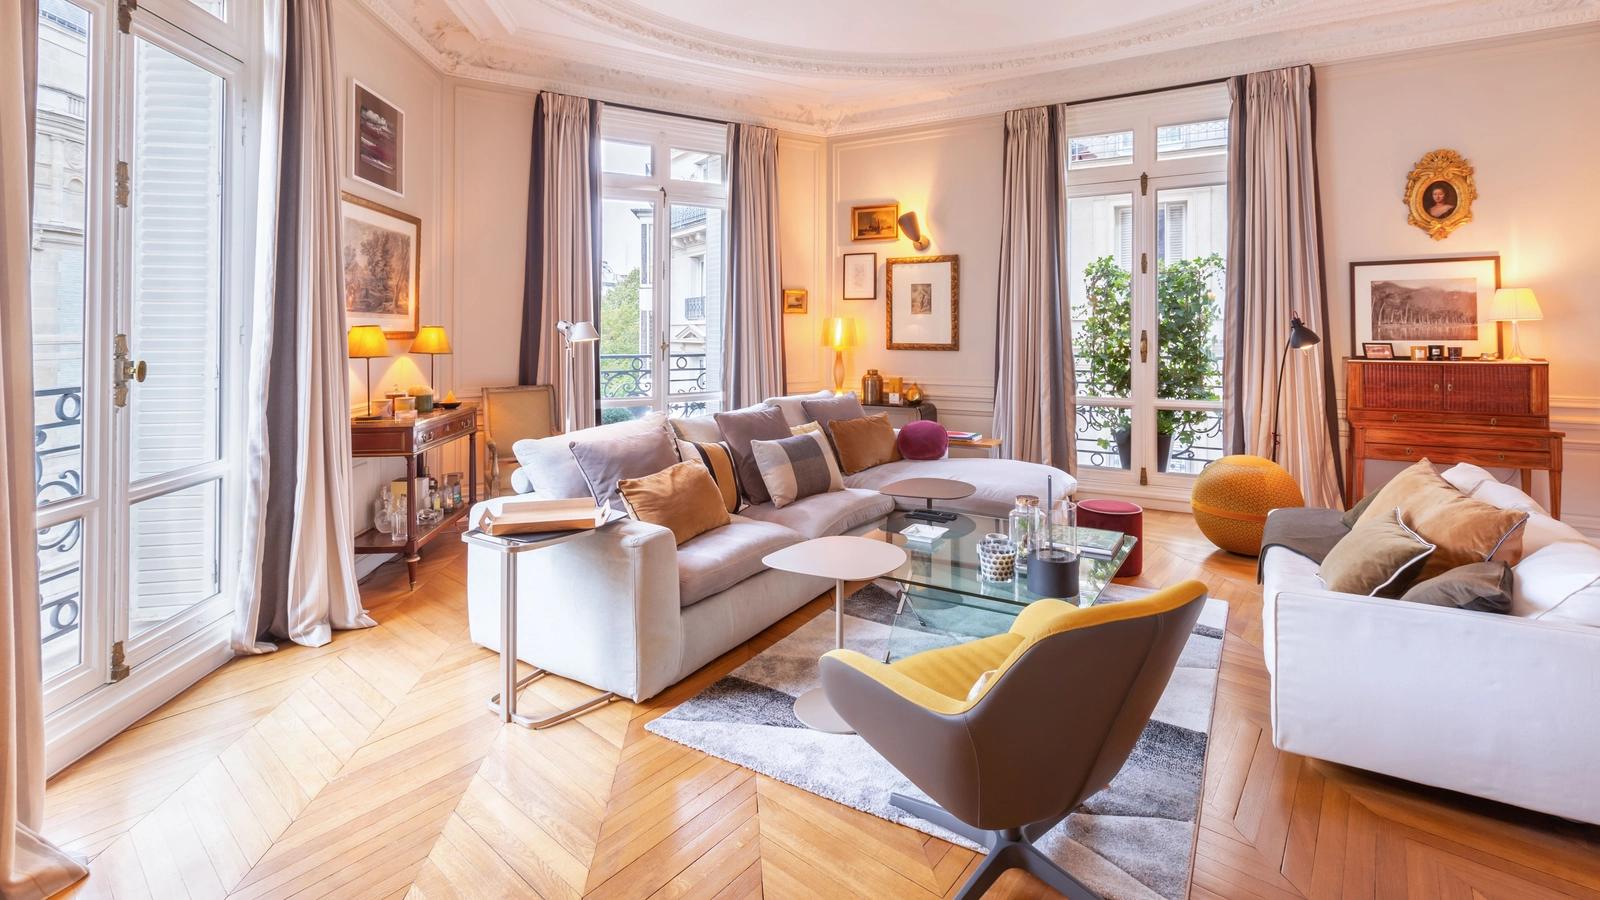 Living room in Grand Haussmann revisited by decorators - 0